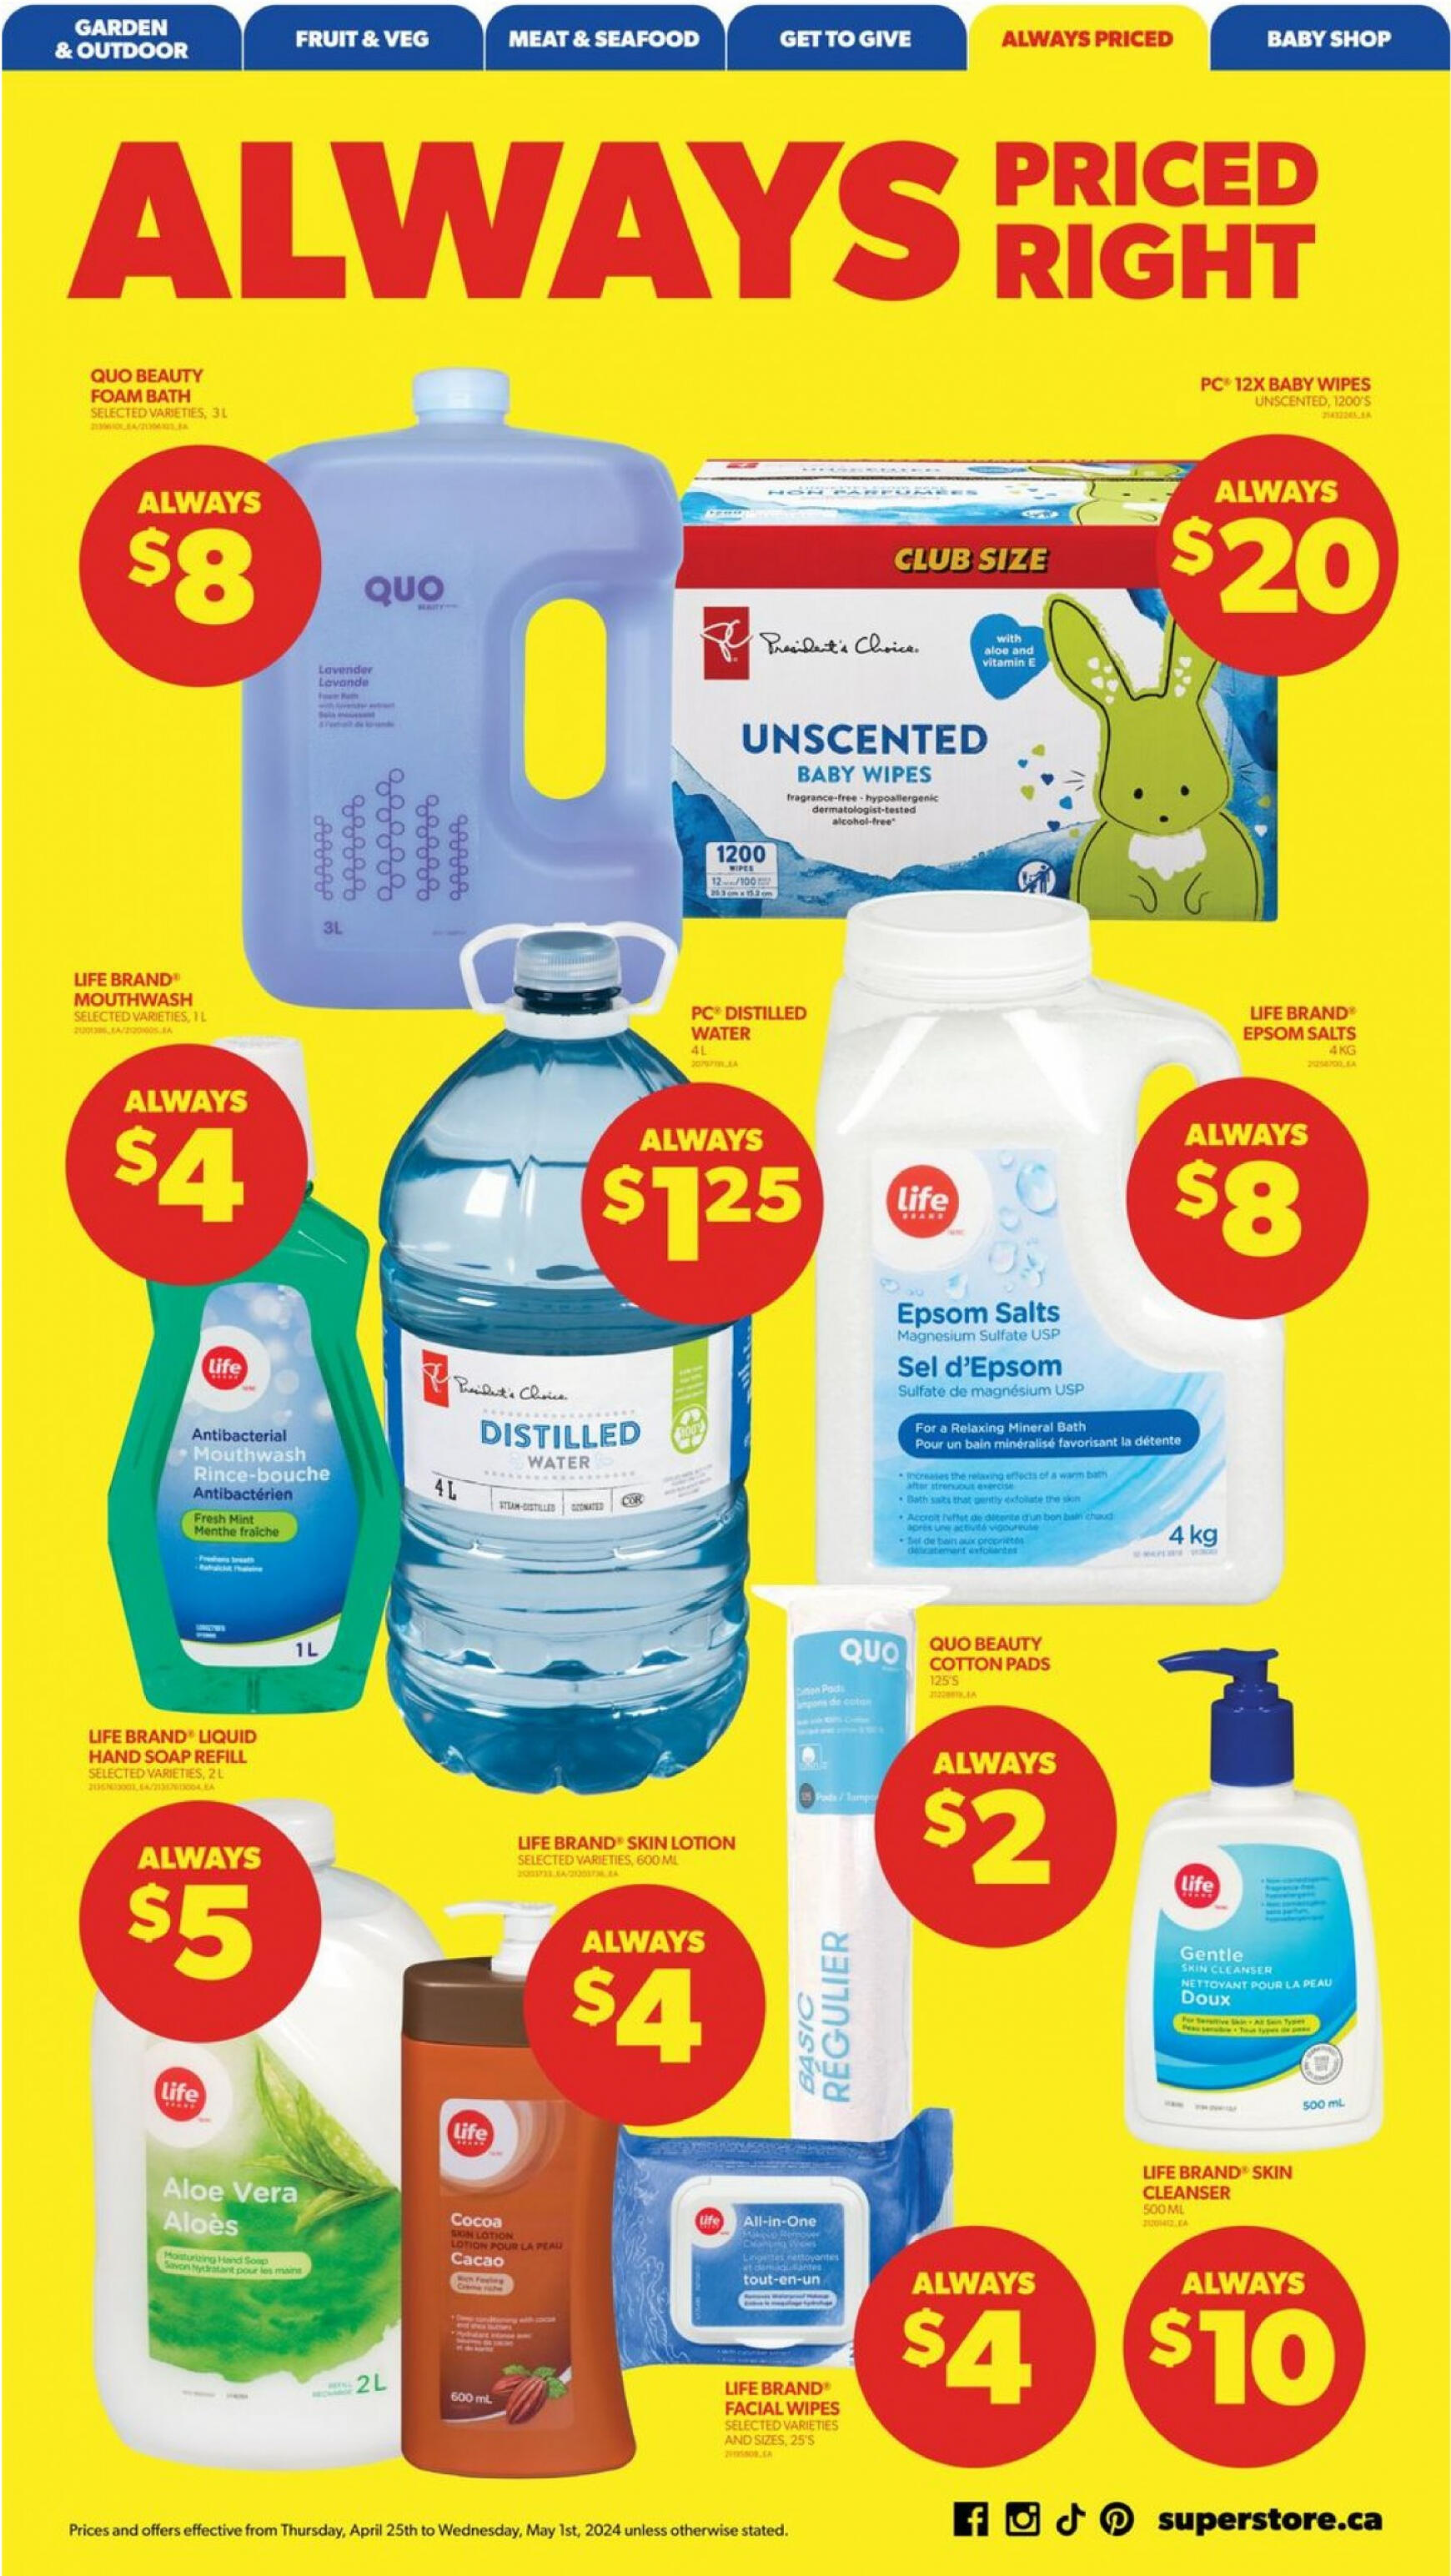 real-canadian-superstore - Real Canadian Superstore flyer current 01.05. - 31.05. - page: 17